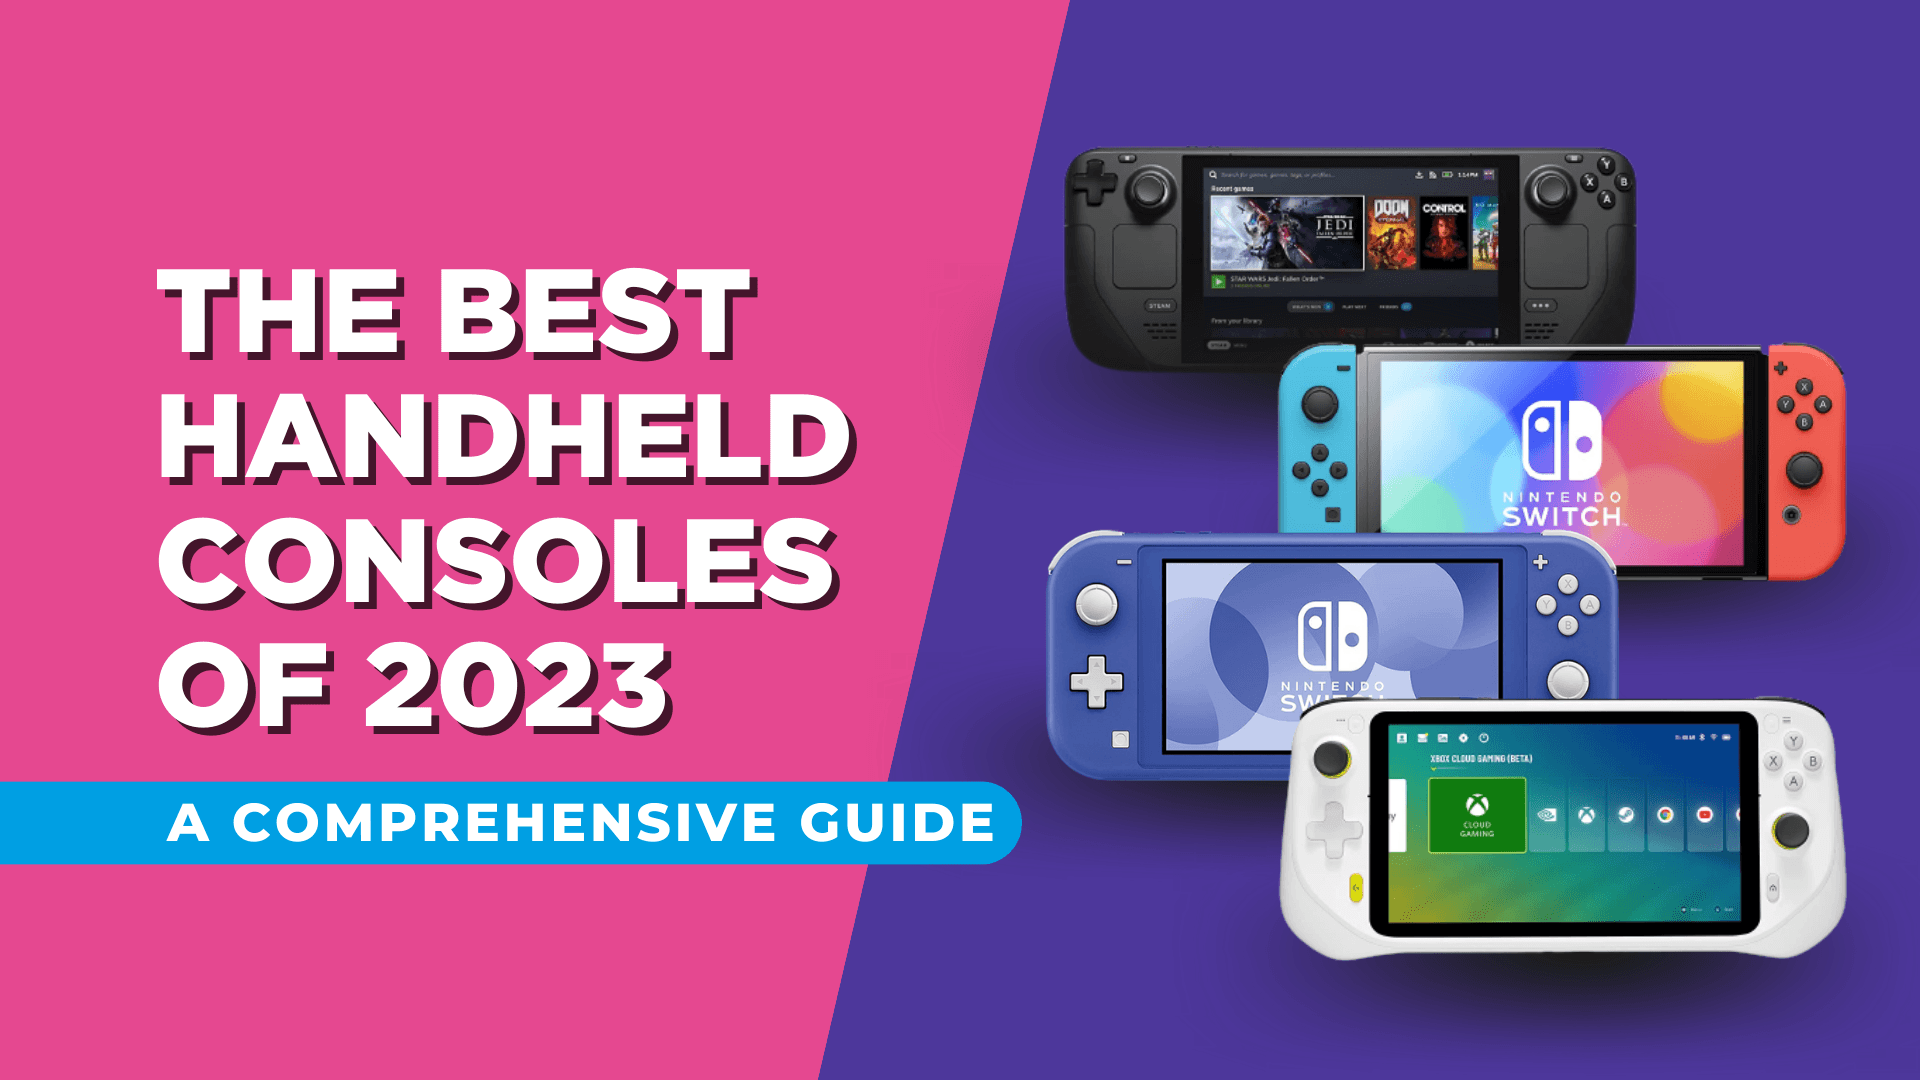 The Best Handheld Consoles of 2023: A Comprehensive Guide - Gamestate